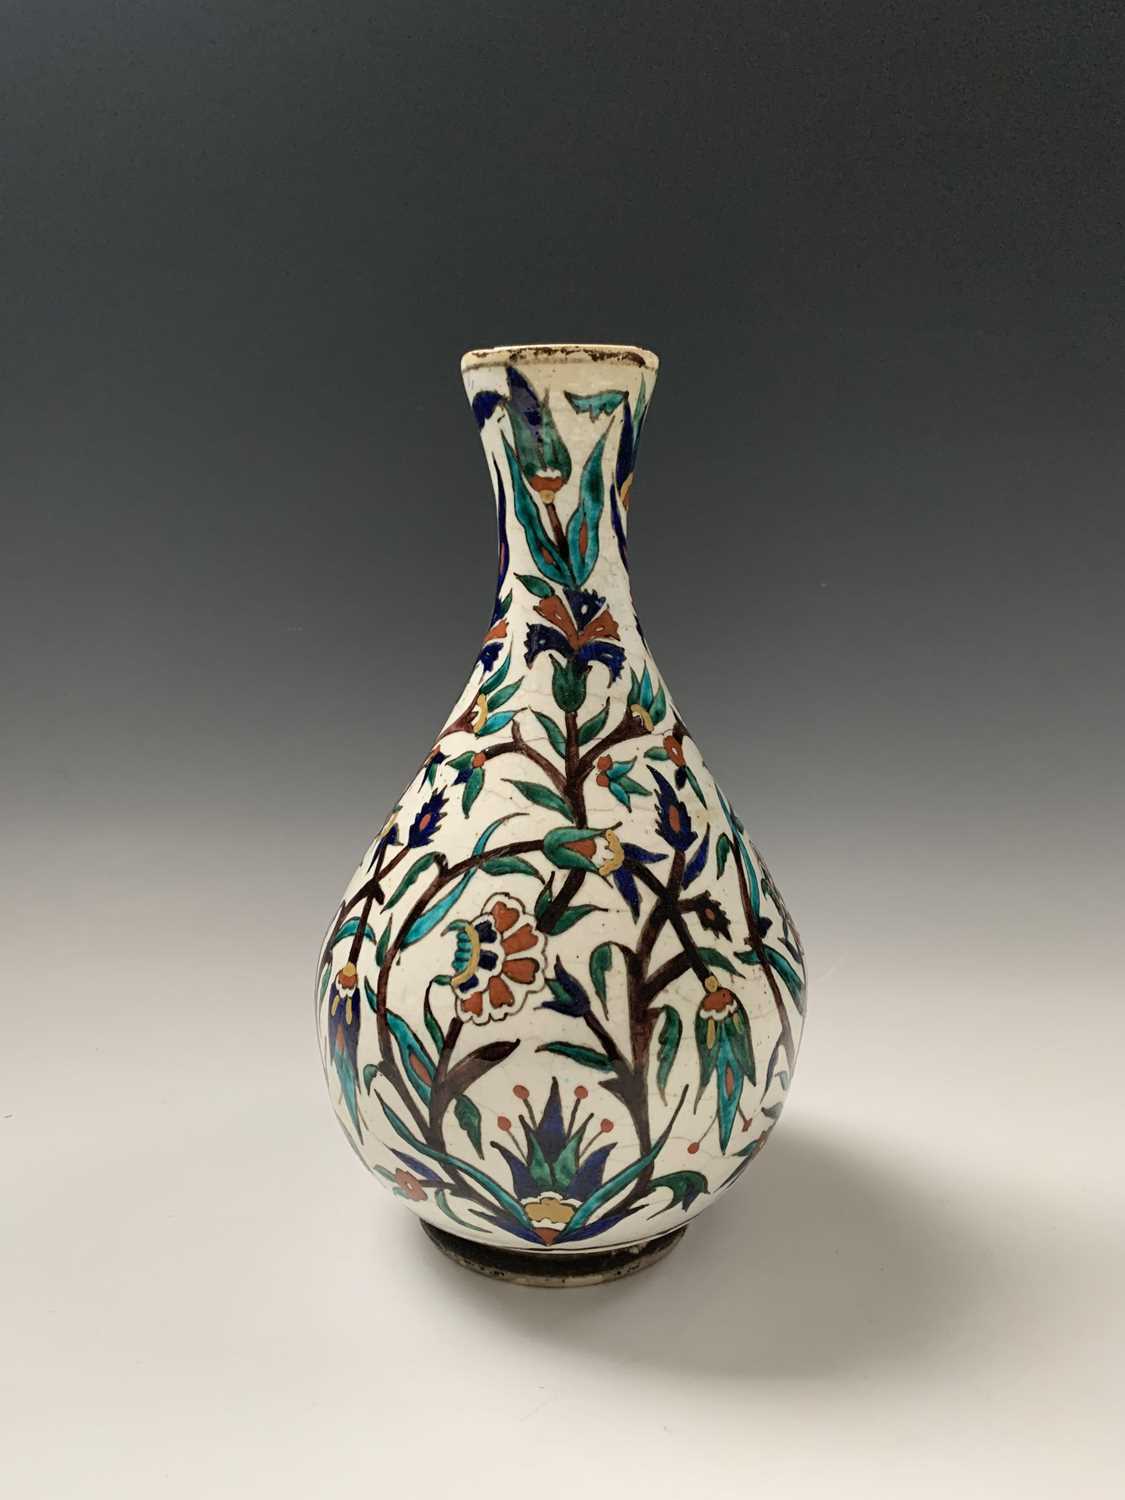 An Iznik pottery vase, 19th century, the bulbous body with a white ground and decorated with